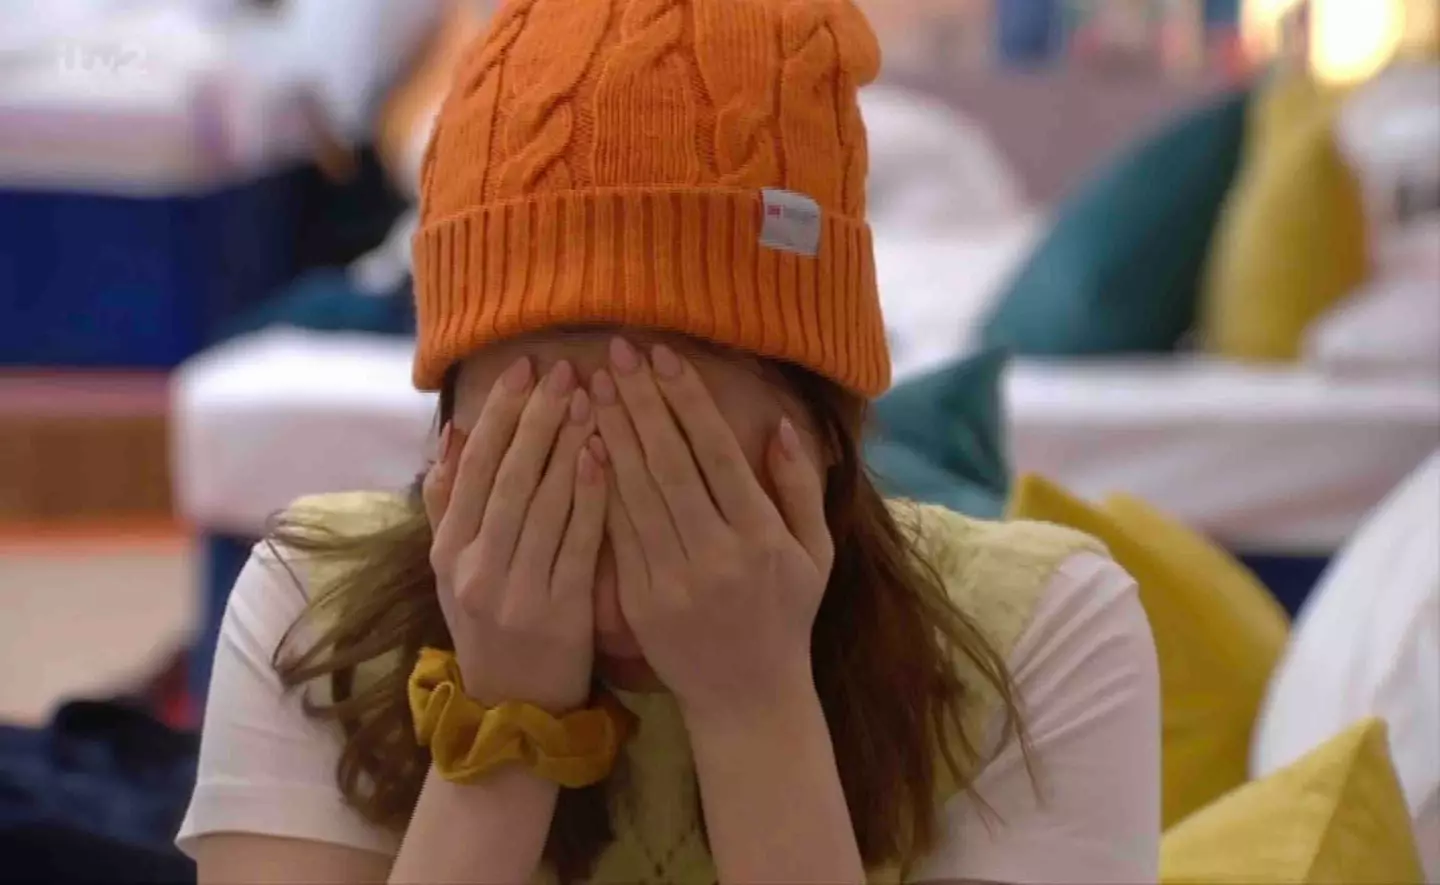 Yinrun has cried several times in the Big Brother house.